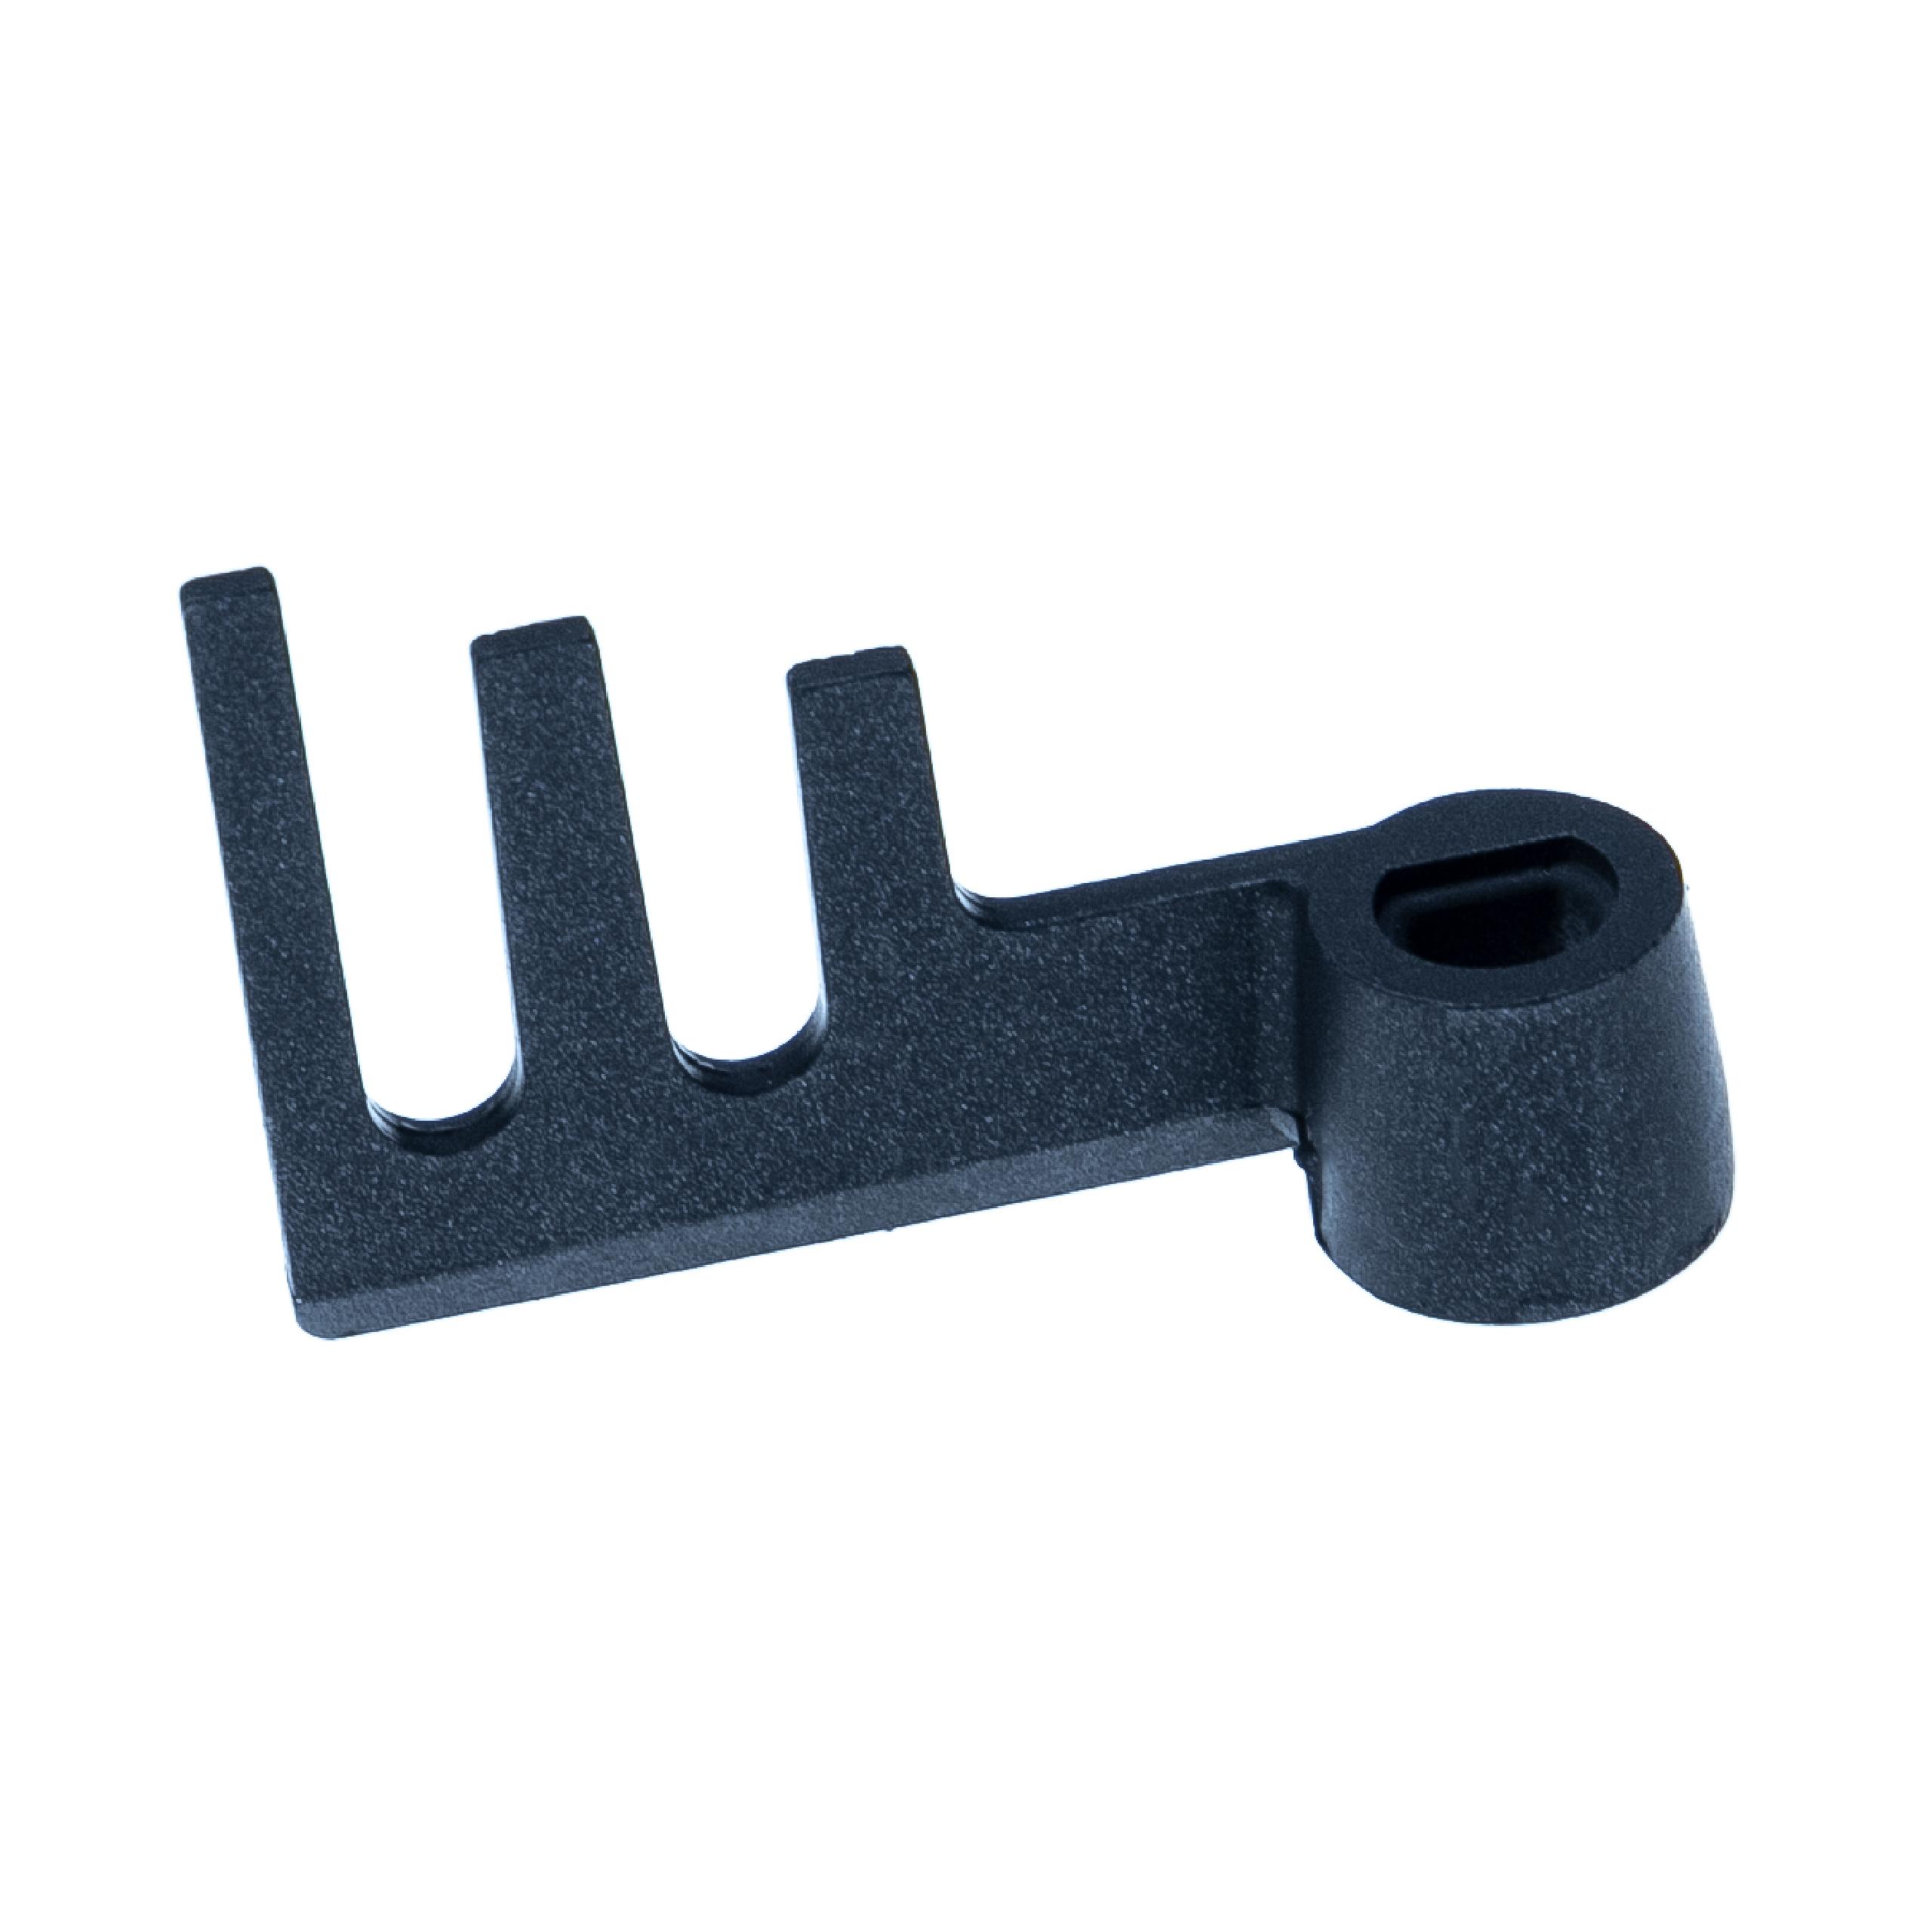 Dough Hook Replacement for ADD96A1054, ADD97G160 for Bread-Maker - Mixing Paddle, black